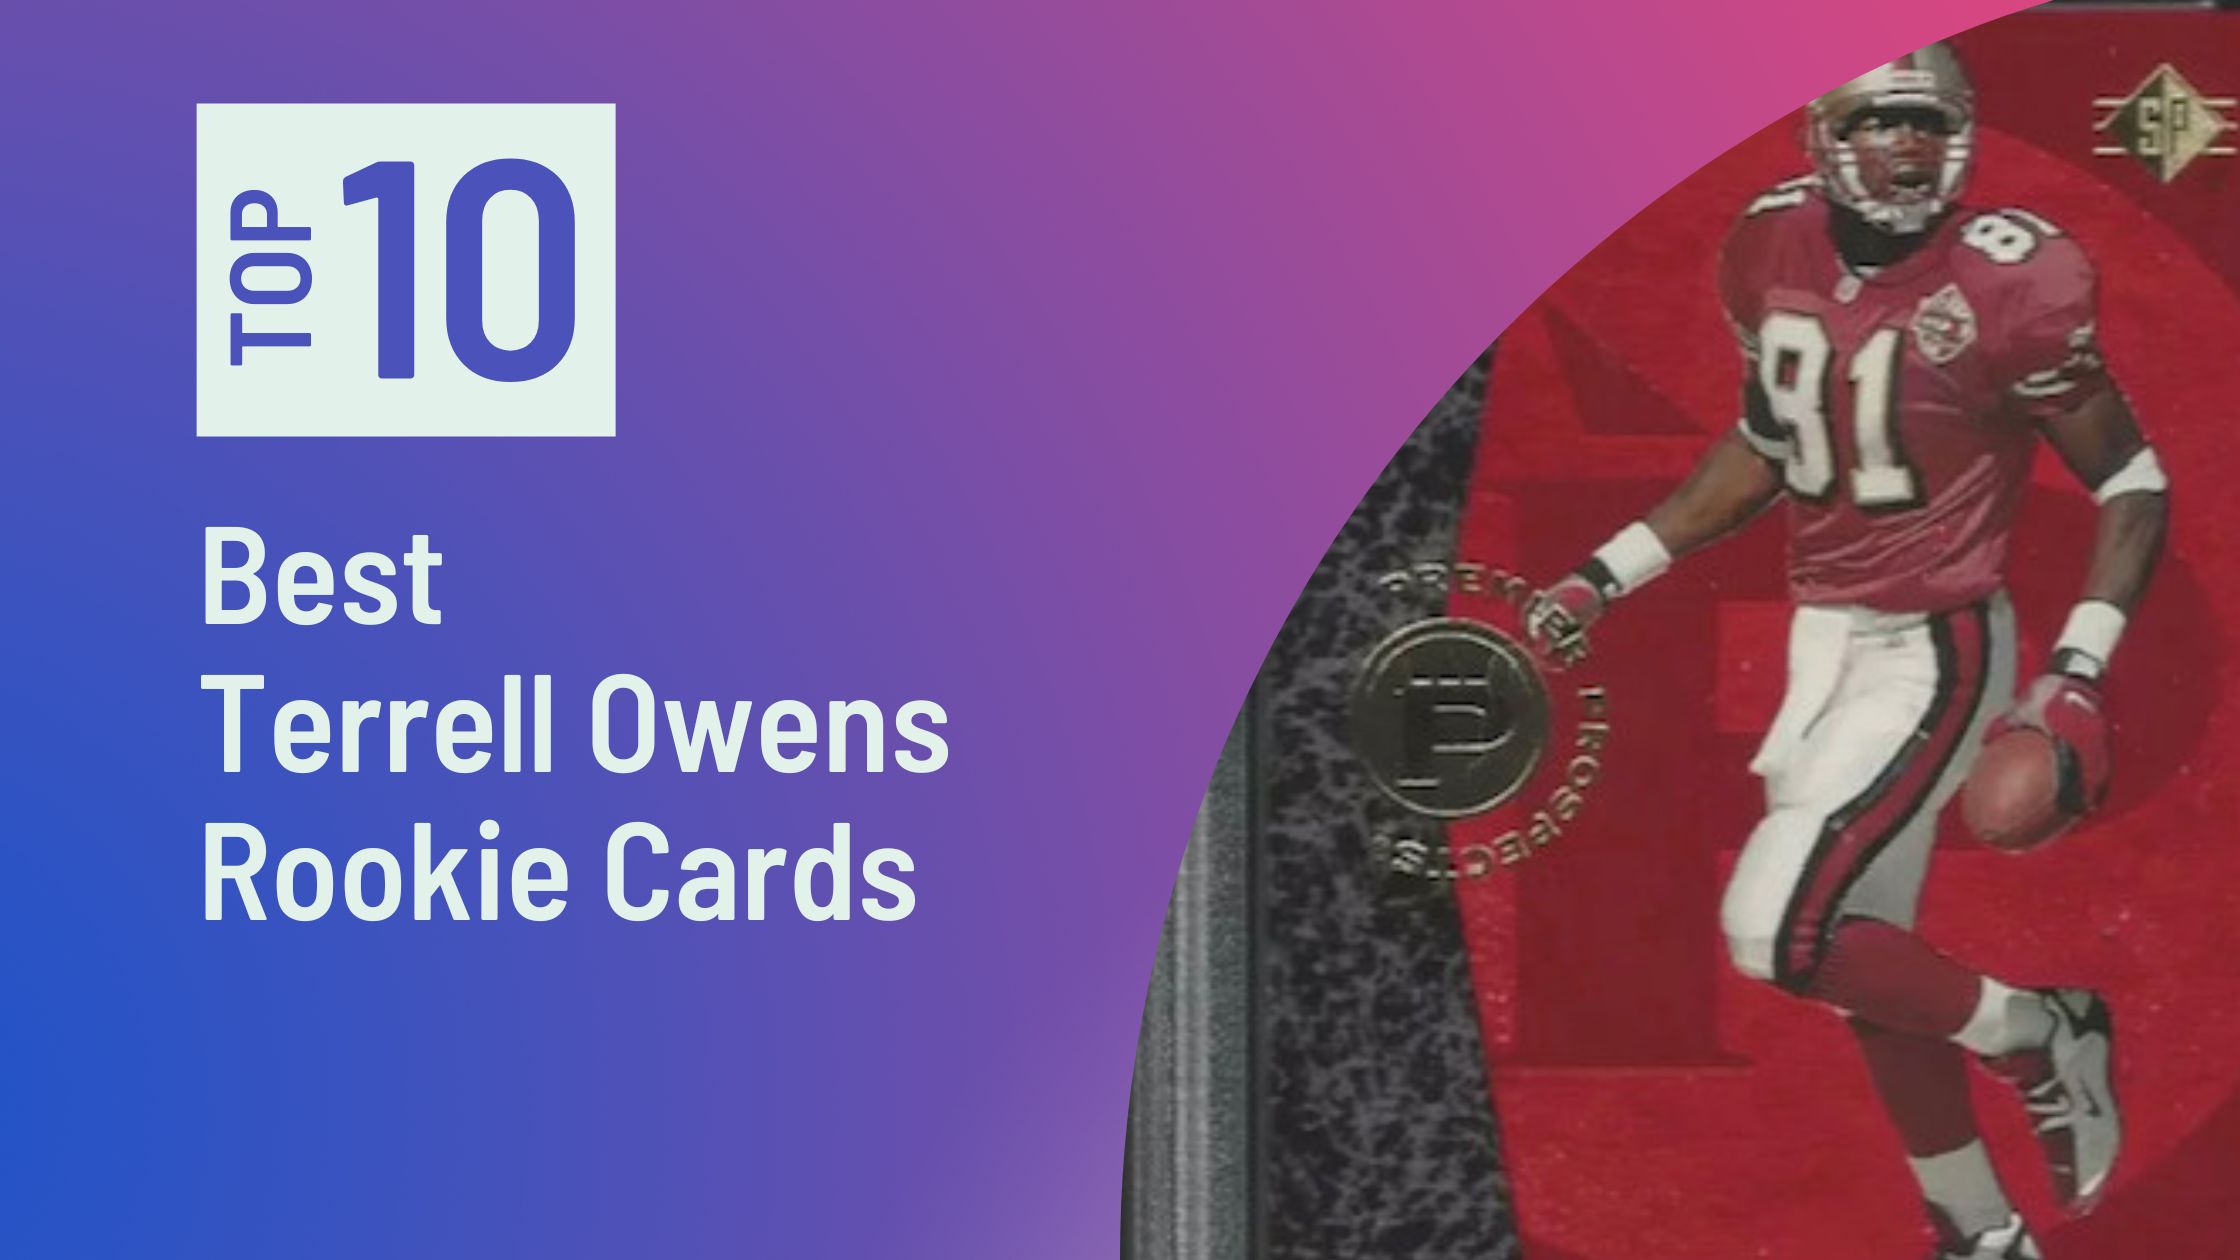 Featured image for the Best Terrell Owens Rookie Cards blog post on Sports Card Sharks